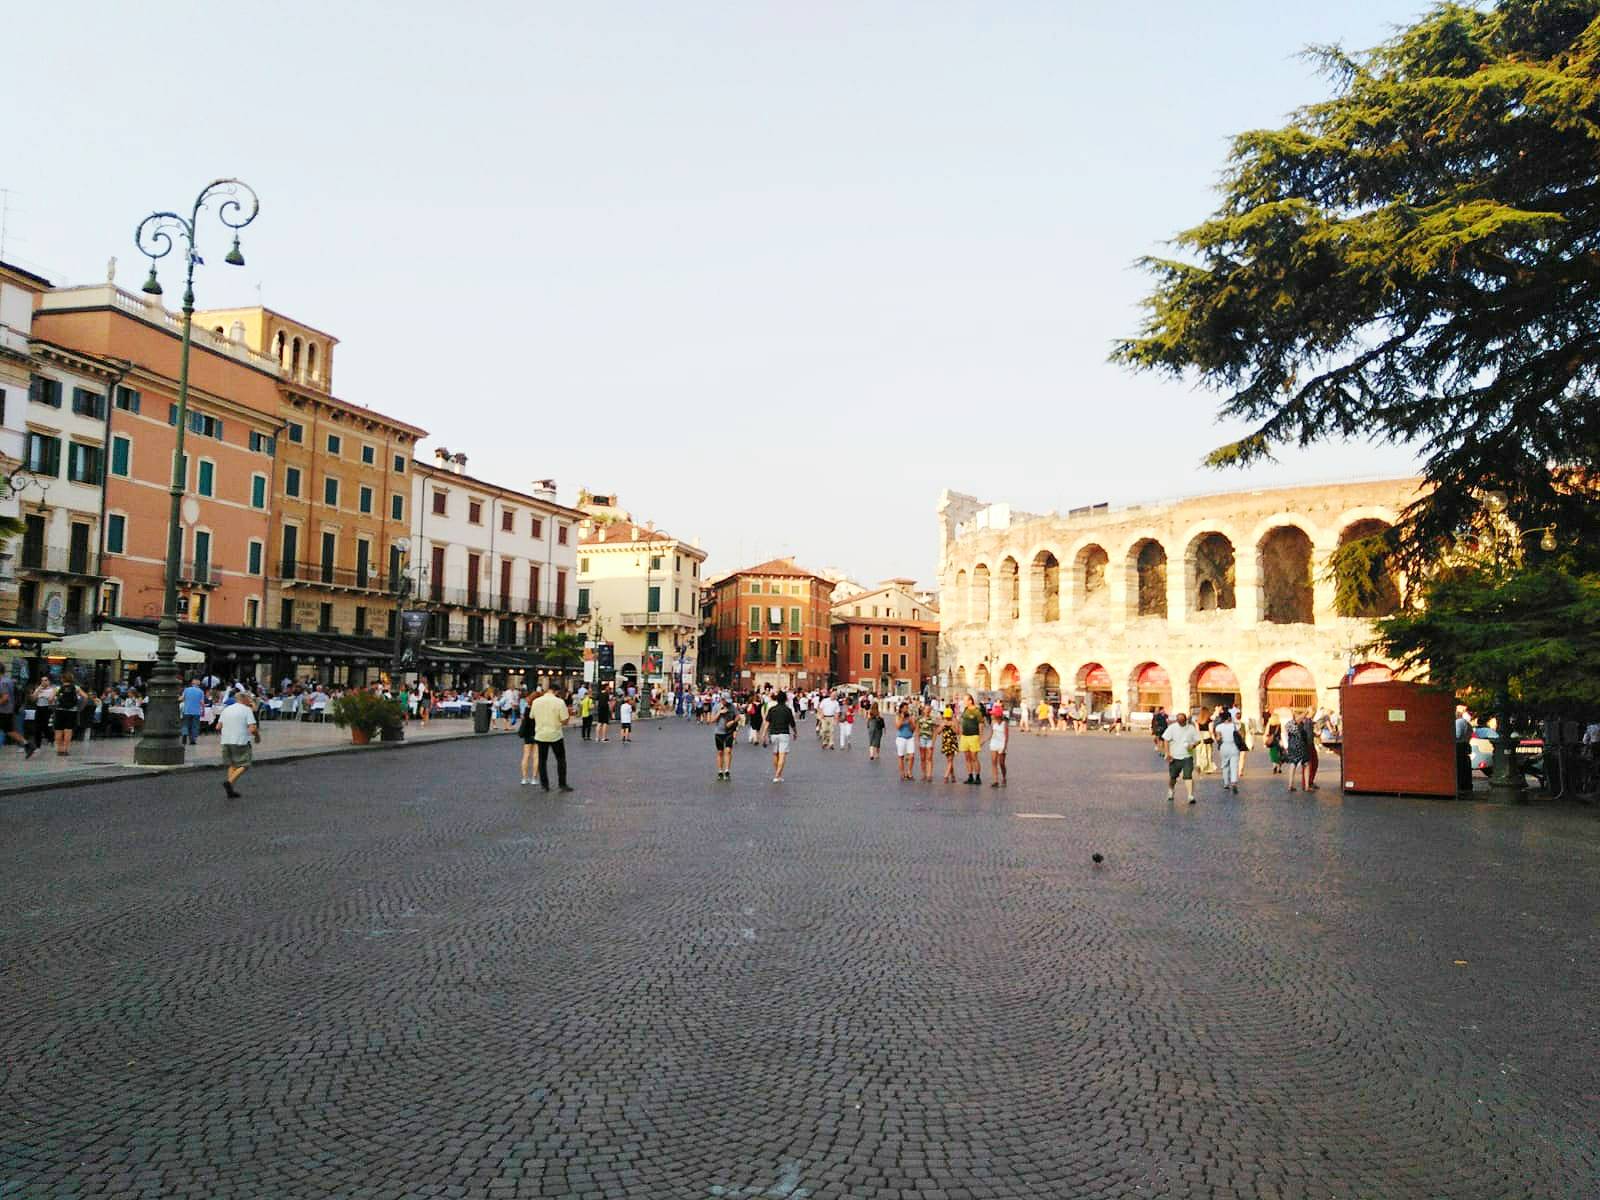 On the right you see the arena of verona - and at the same time the centre of Veona - a big square surrounded by the arena and restaurants and souvenir shops